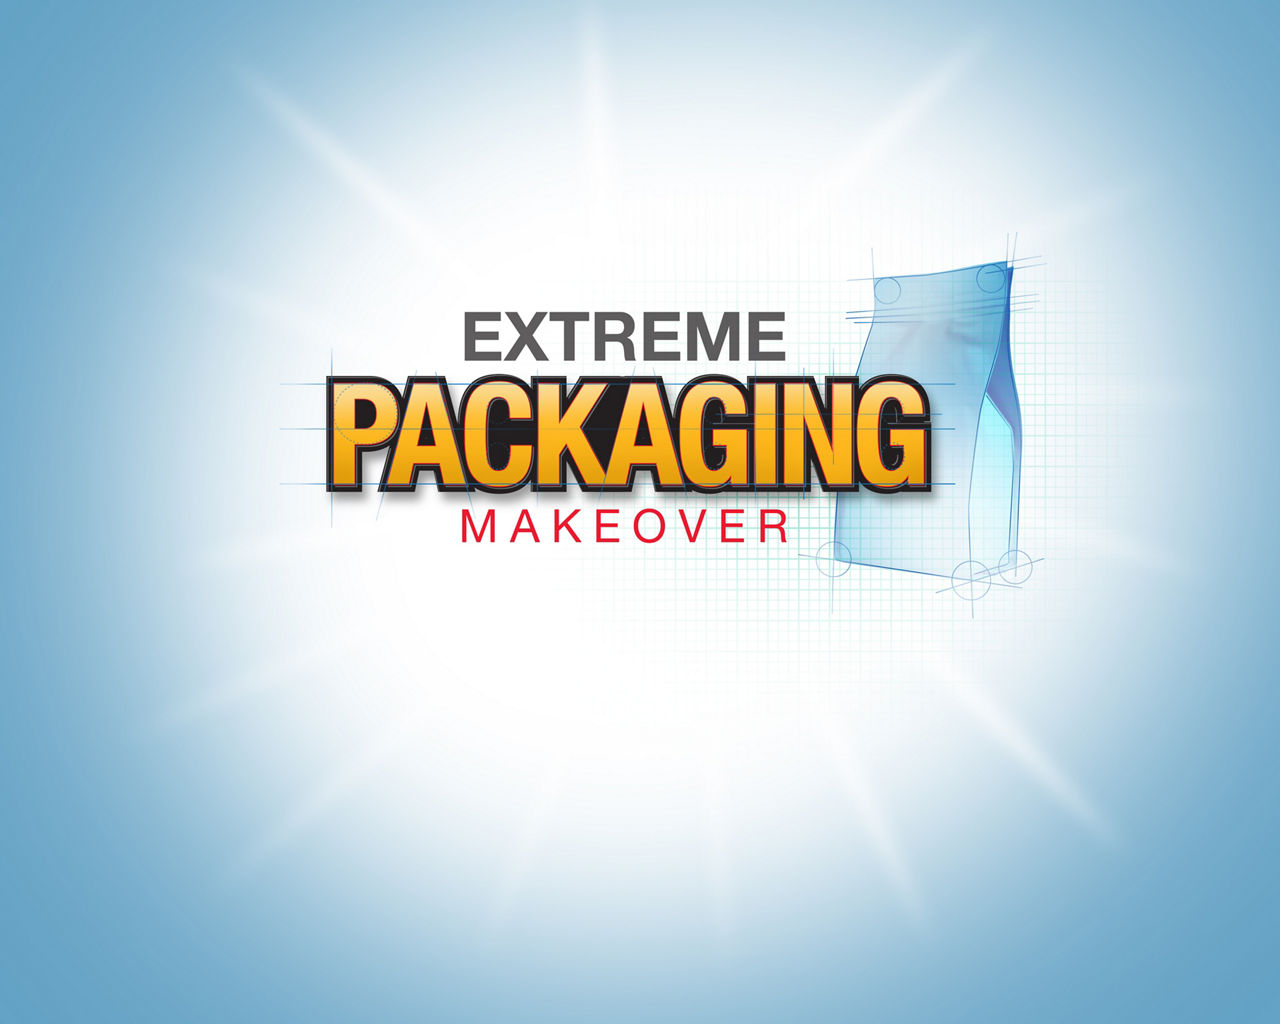 Extreme Packaging Makeover Webinar Series